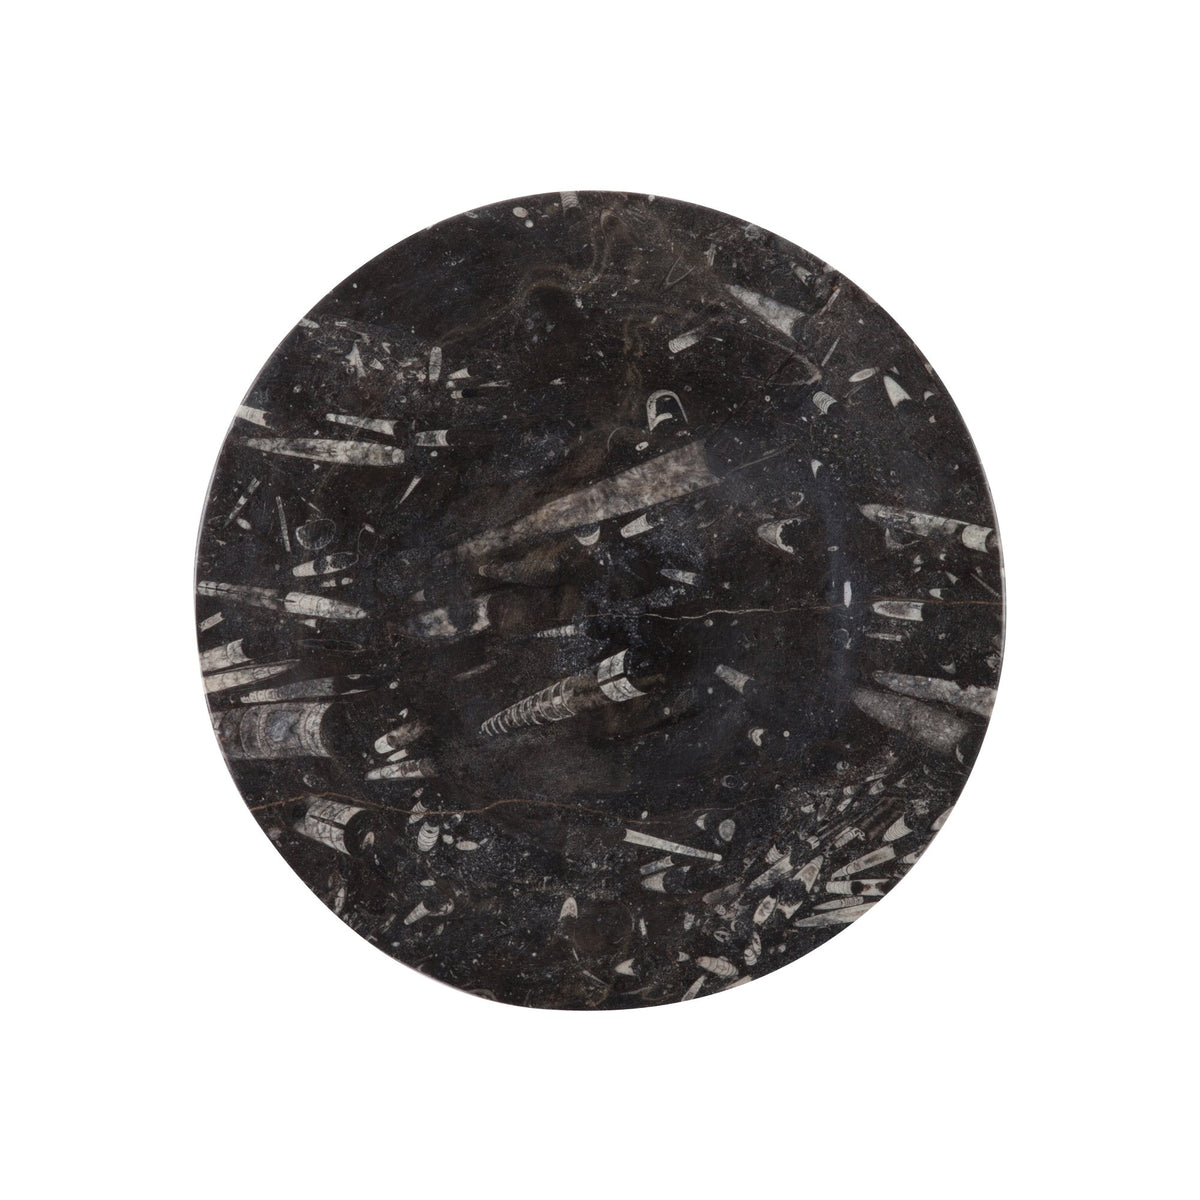 Round Black Fossil Plate